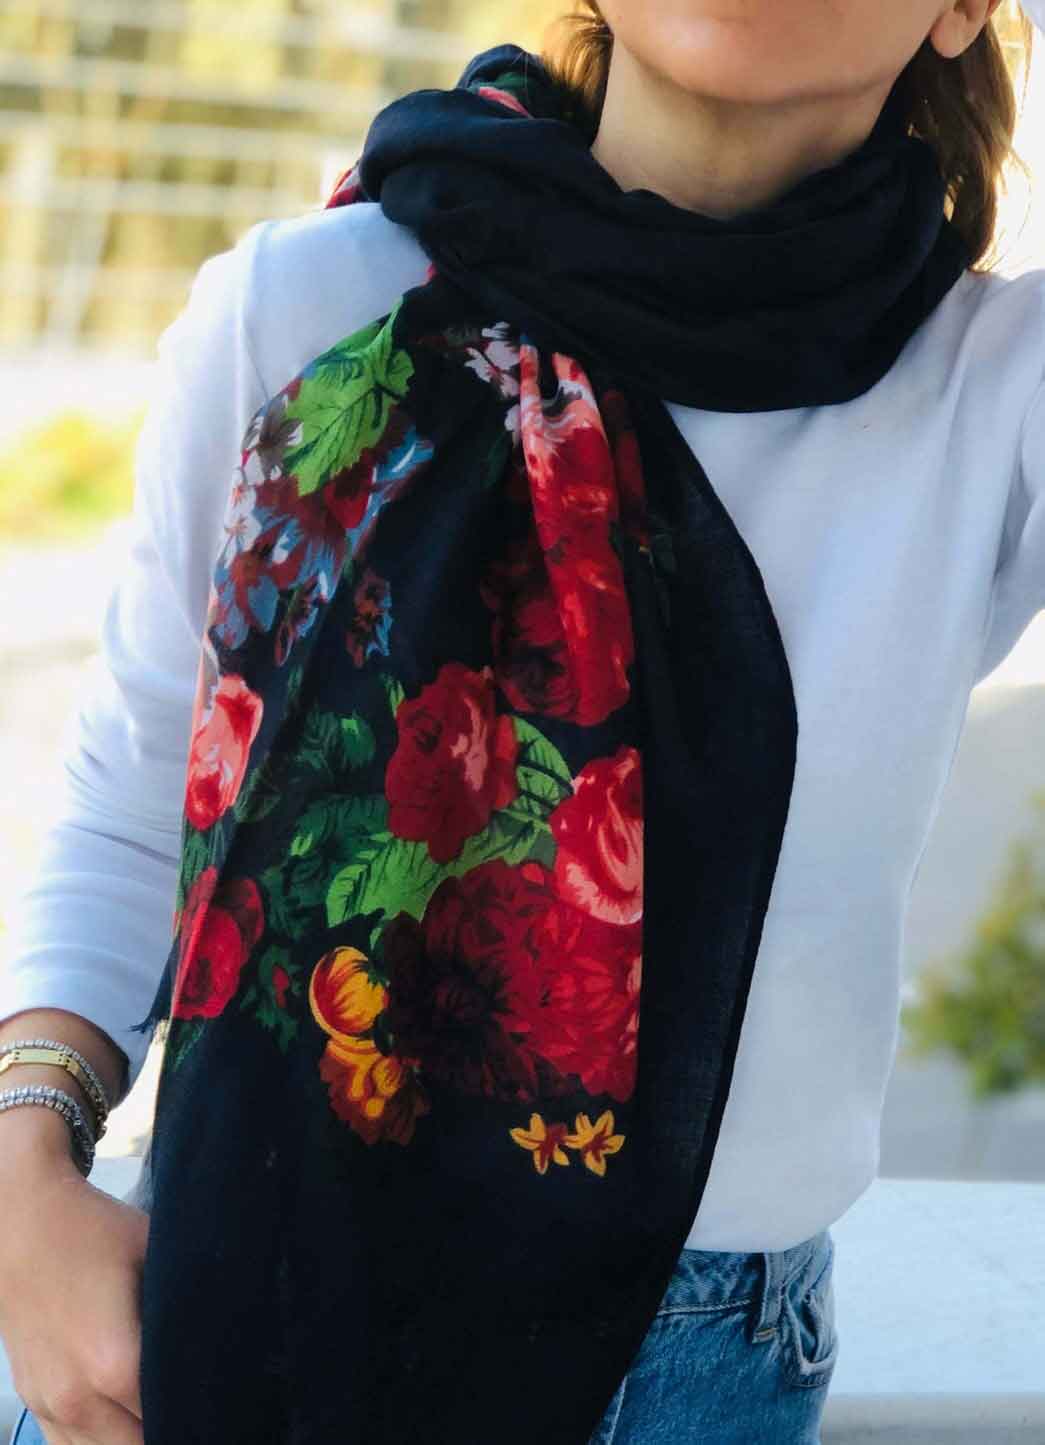 100% ORGANIC COTTON LARGE Dark Scarf, Spring Autumn Scarf, Best Gift for Women, Navy Blue and Floral with Softly Frayed Edges